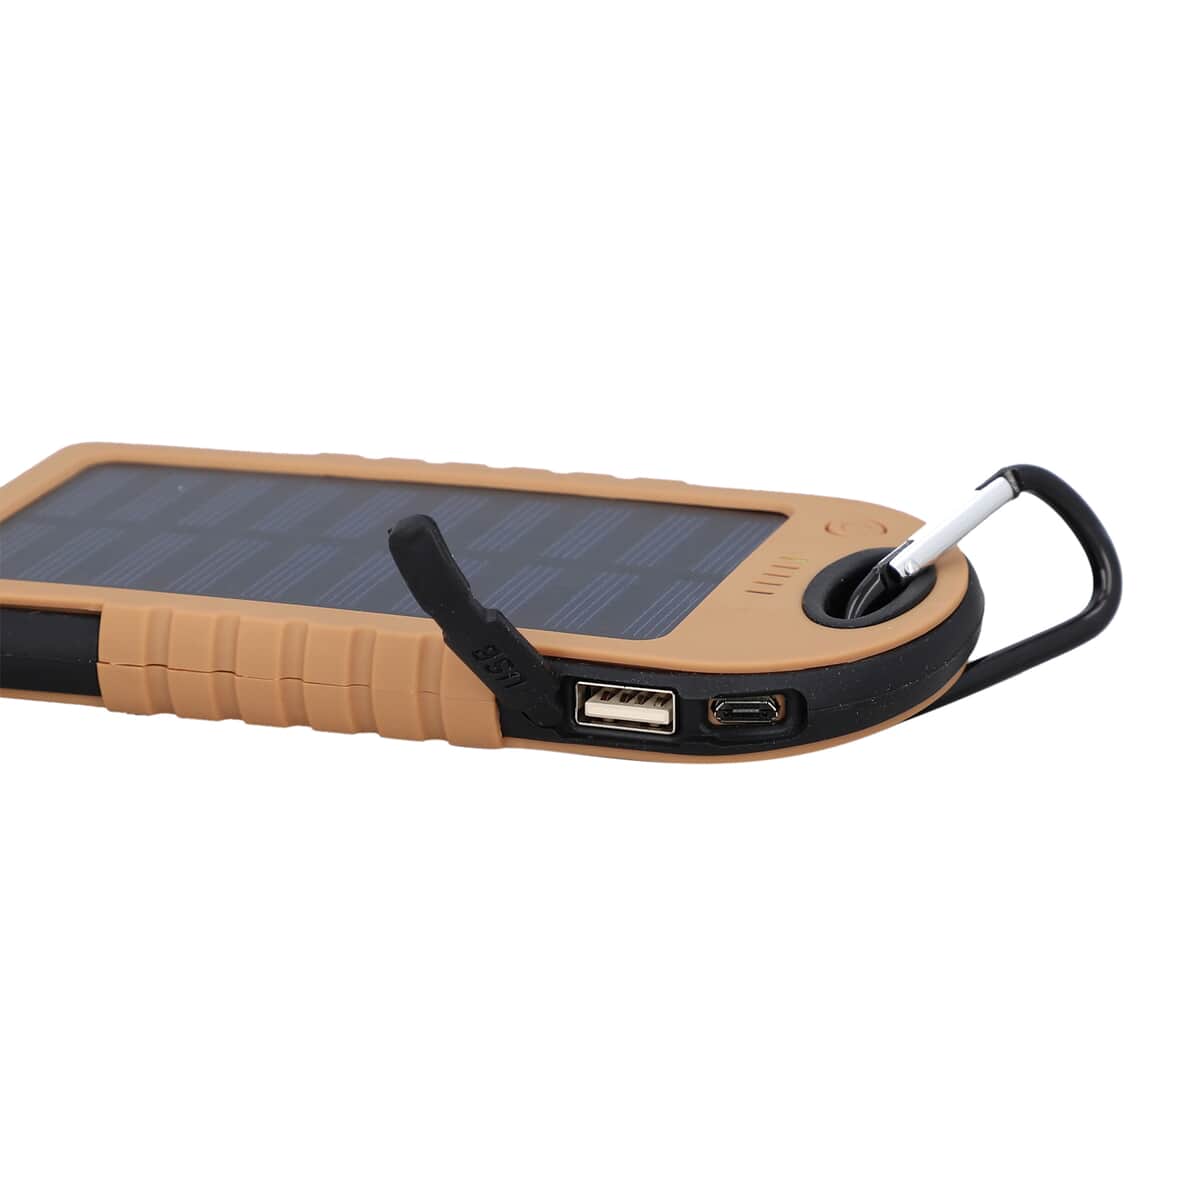 Homesmart Camel Color Carabiner Solar 5000 mAh Battery Charger with USB & Emergency LED Torch image number 5